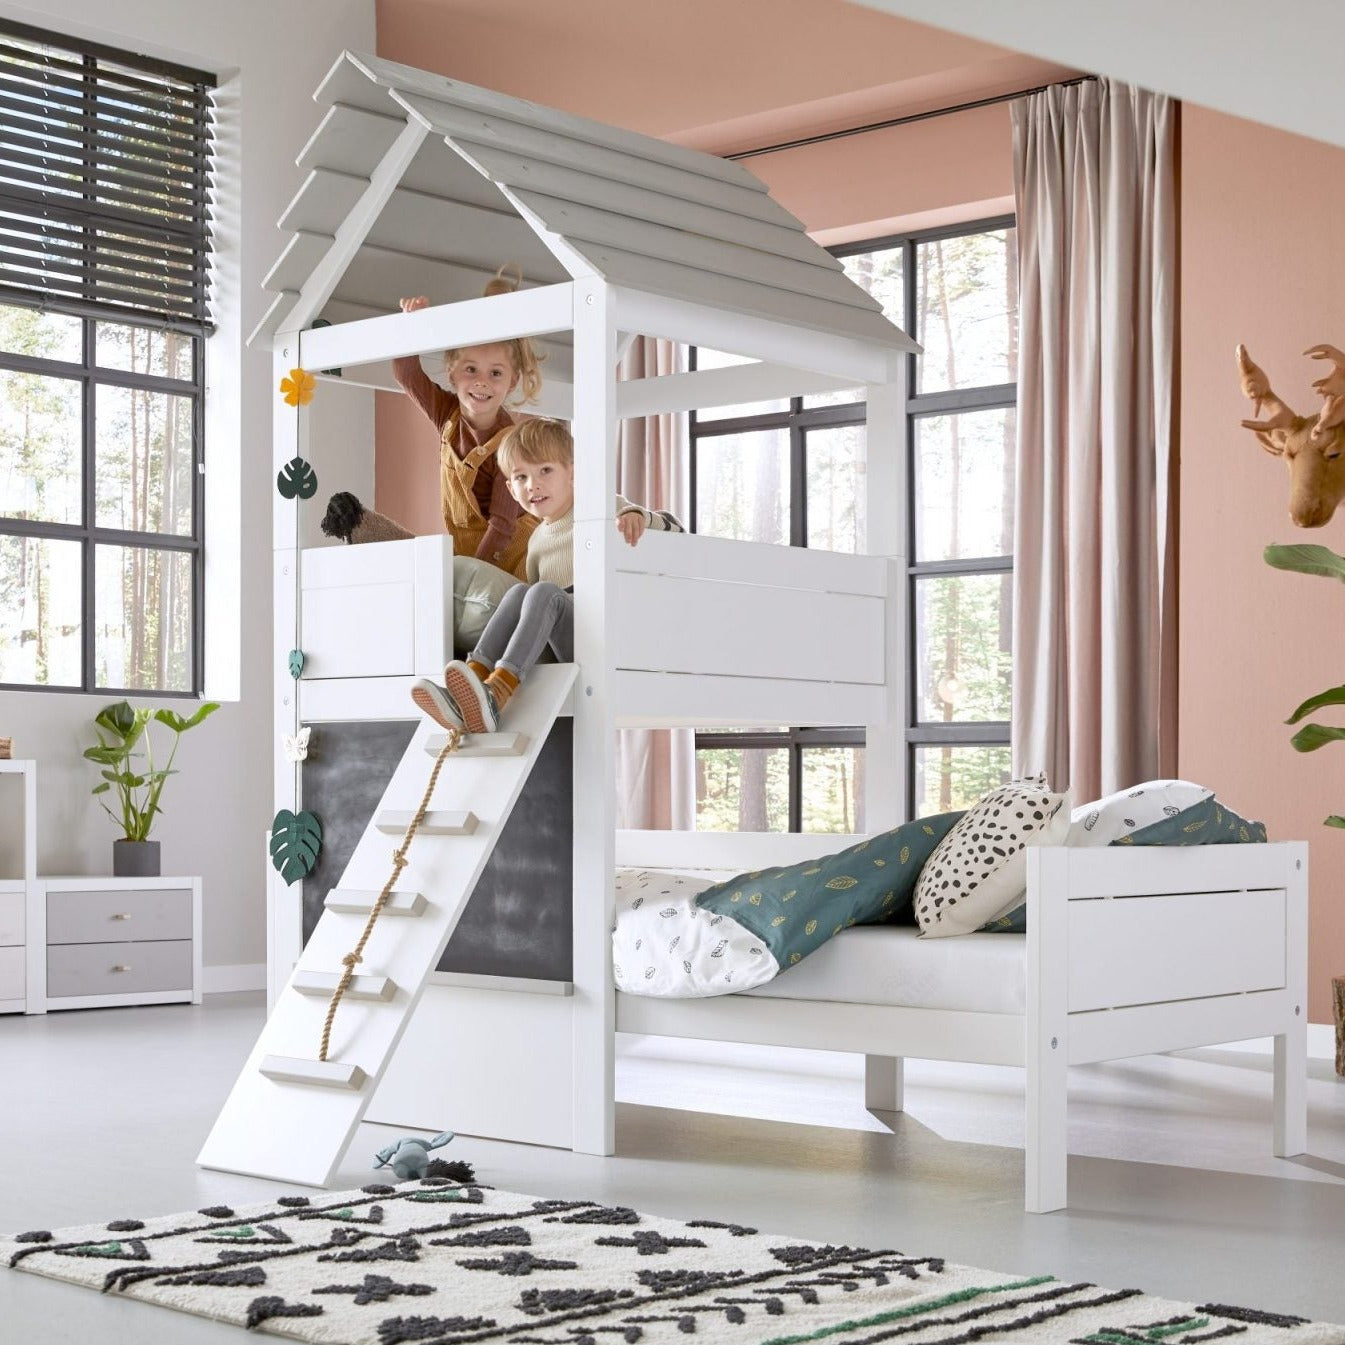 Play Tower Children’s Bed by Lifetime Kids